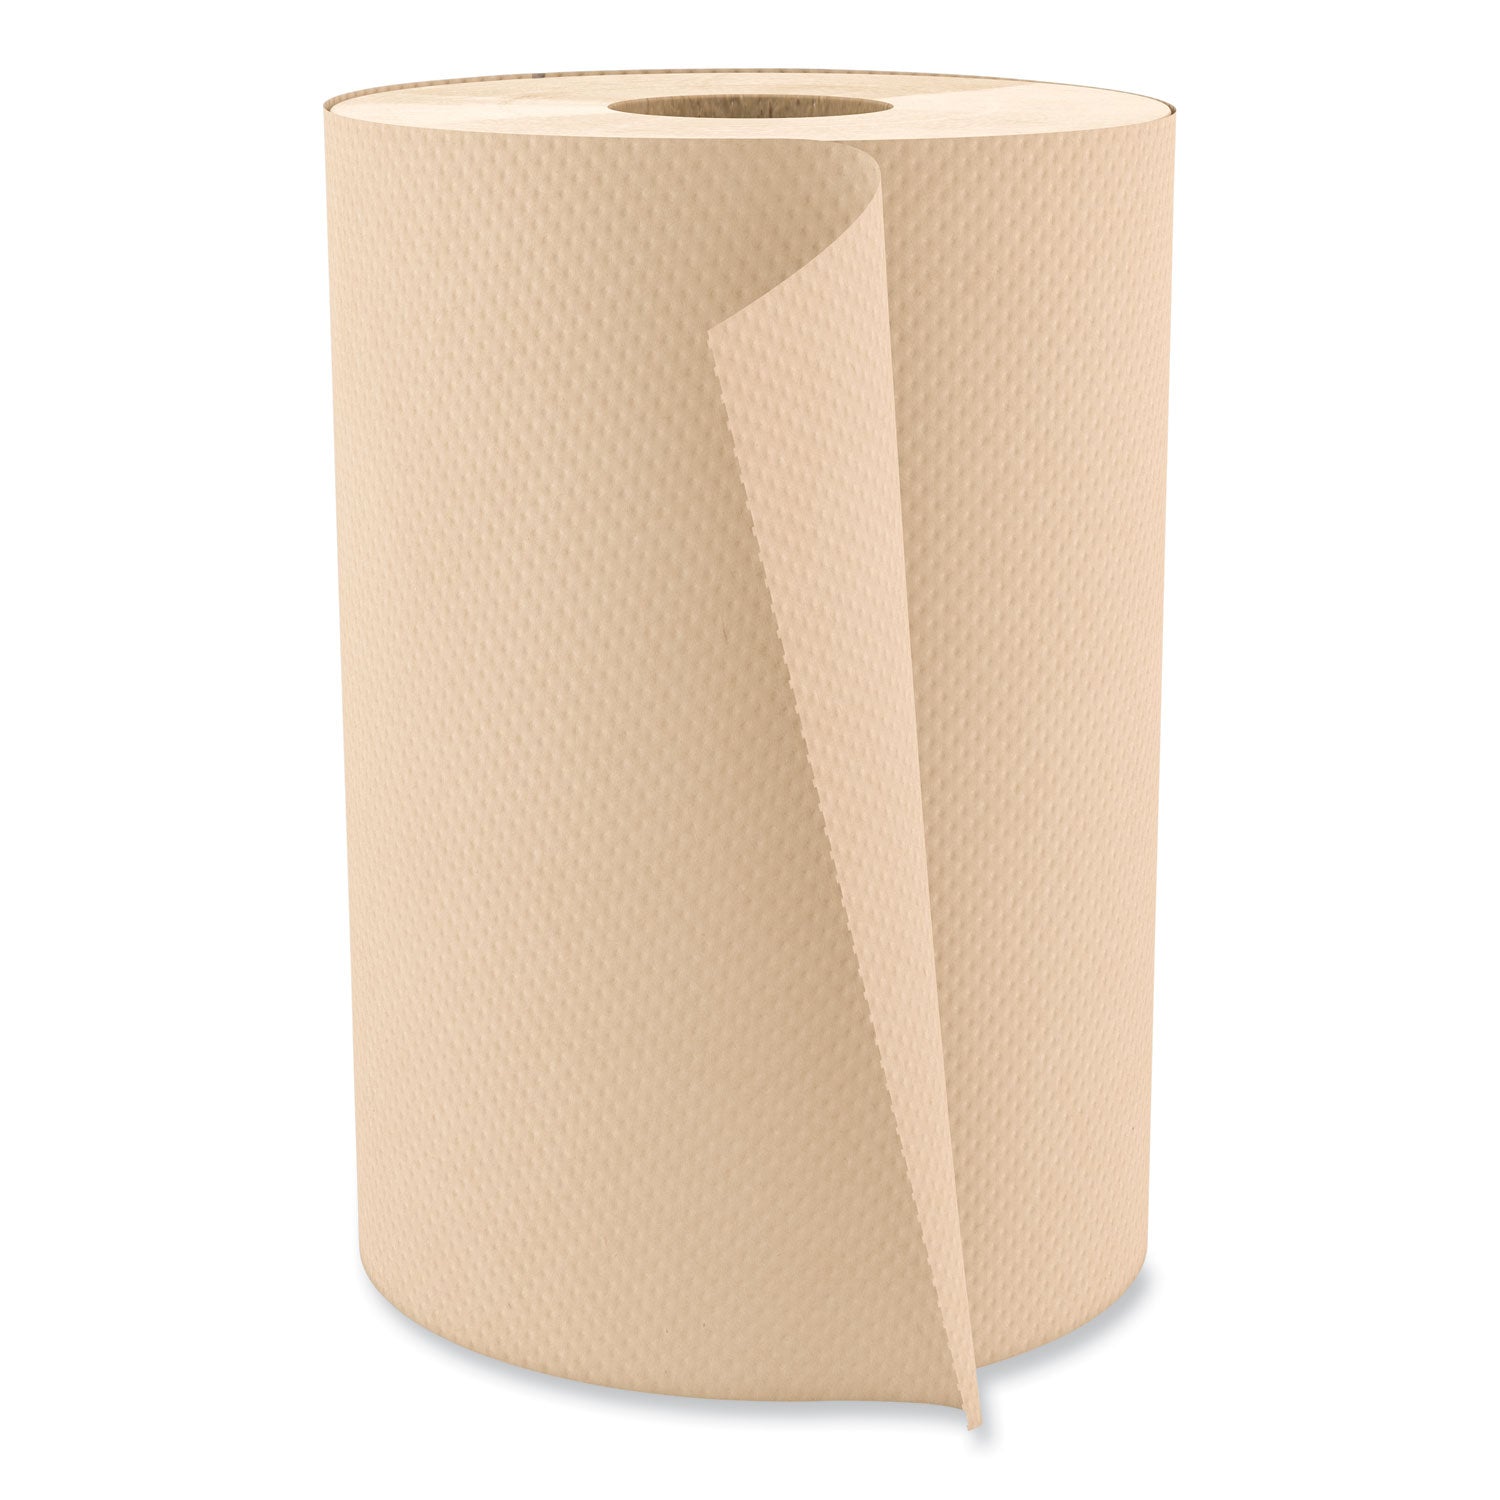 select-hardwound-roll-towels-1-ply-788-x-350-ft-natural-12-rolls-carton_csdh035 - 2